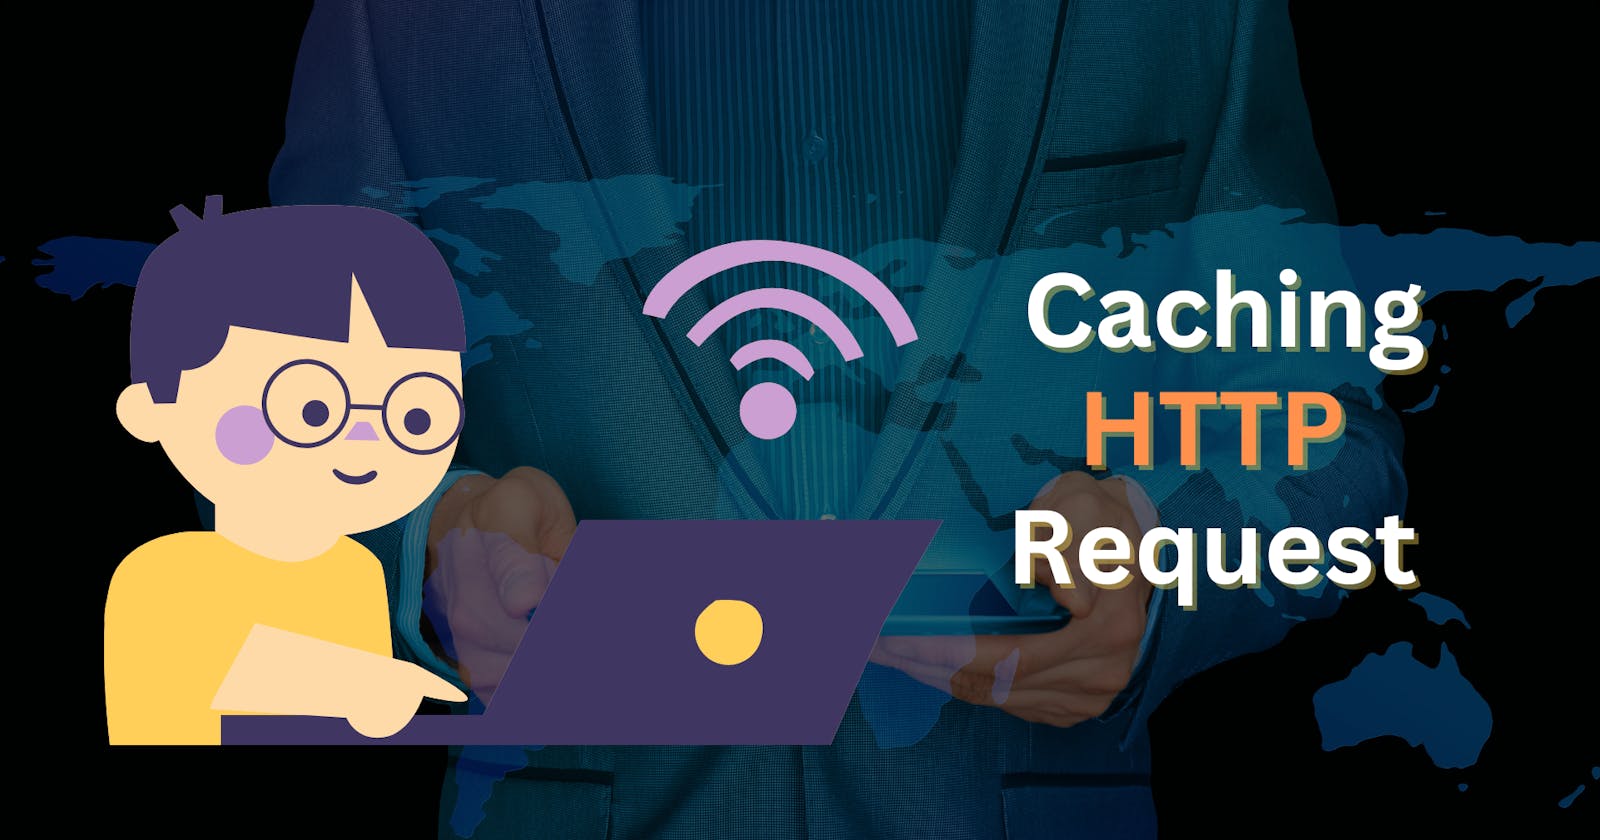 Caching HTTP Requests in JavaScript